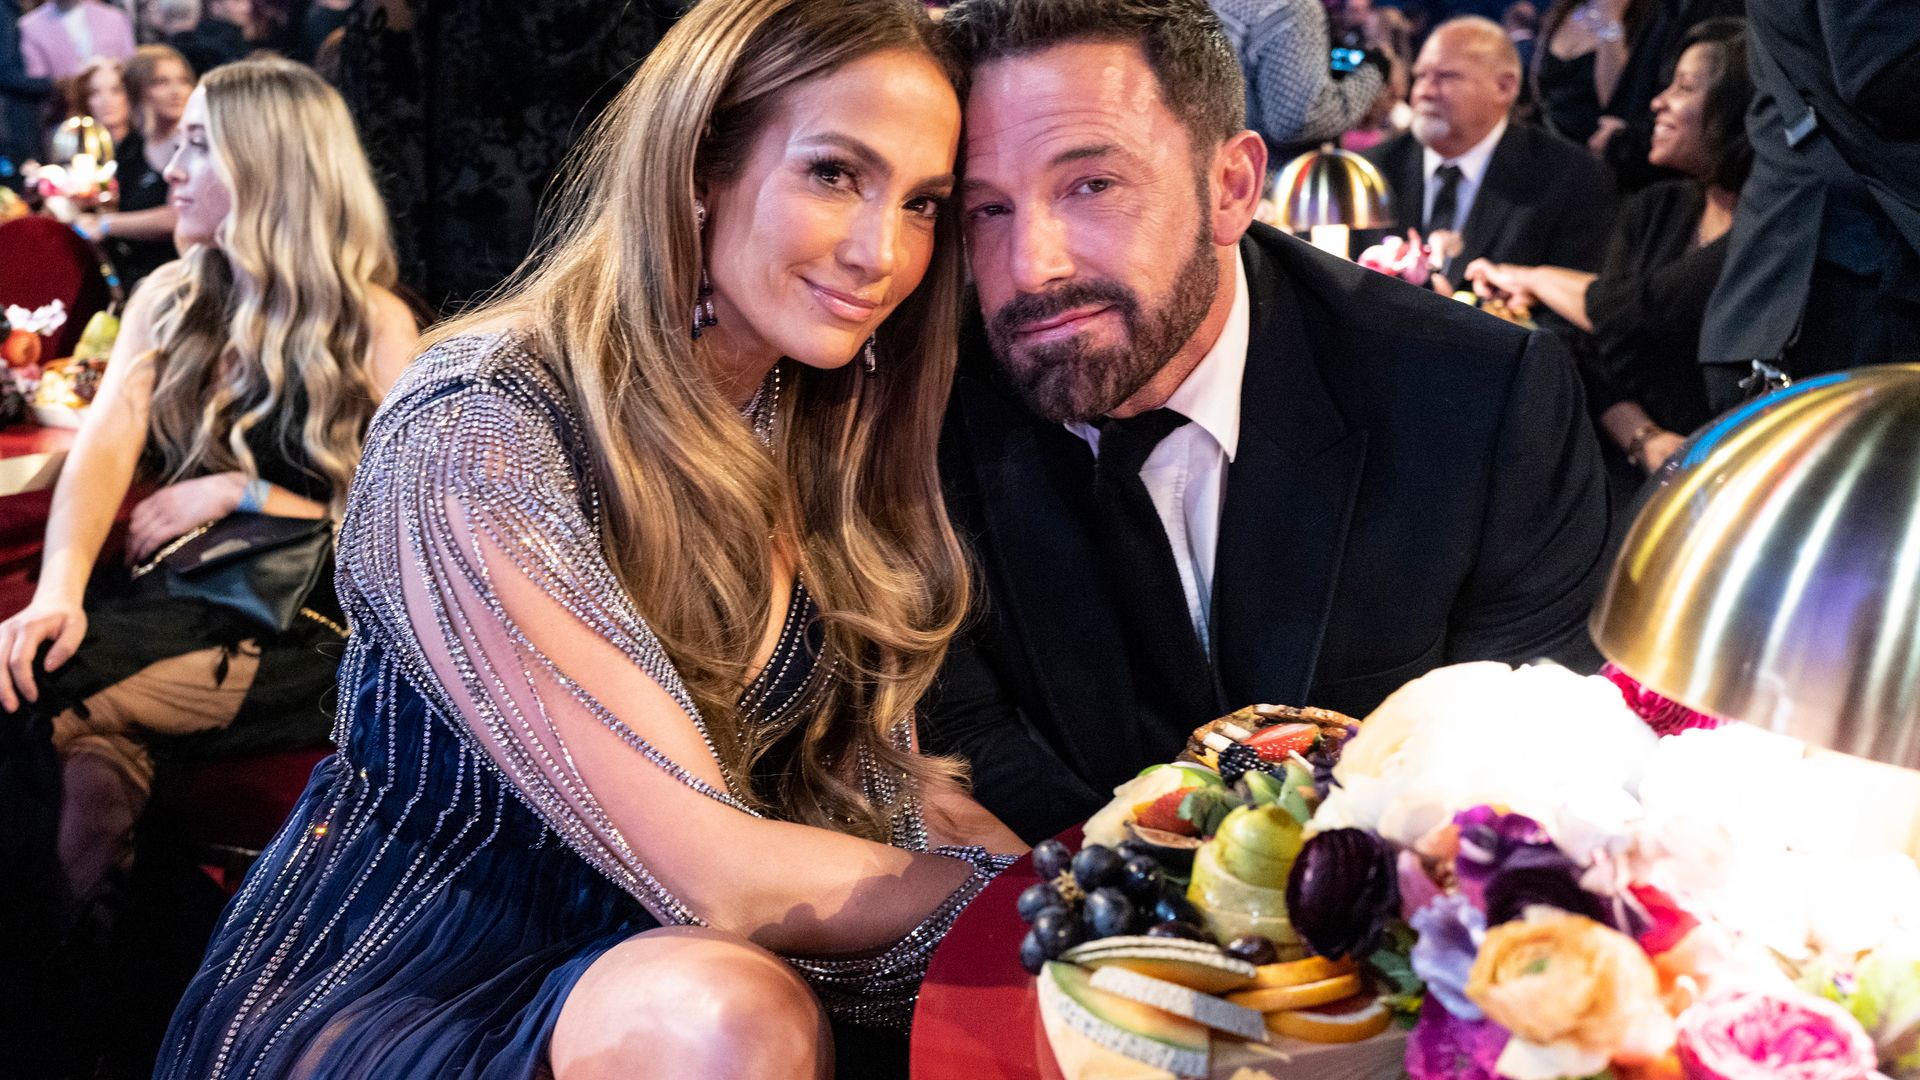 Jennifer Lopez and Ben Affleck put on a united front as they are photographed for the first time since split rumors